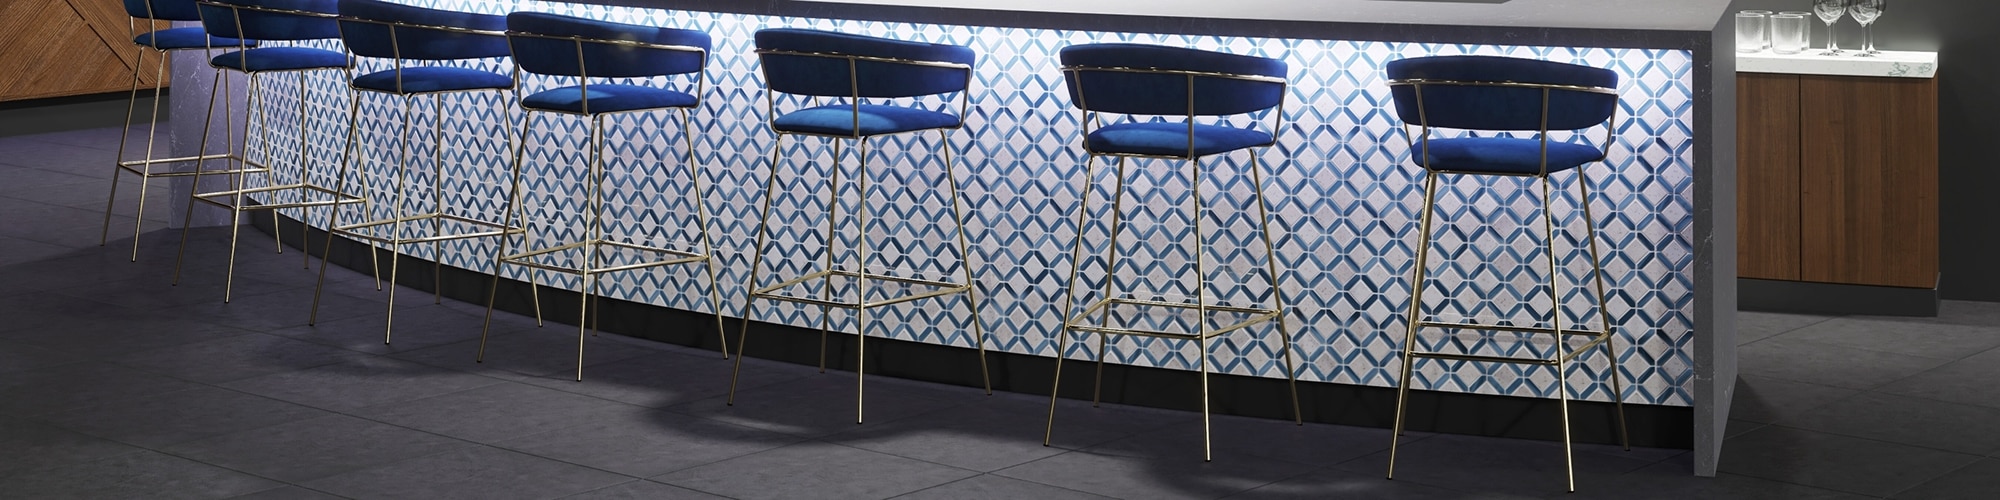 Nightclub bar with dark gray floor tile that looks like concrete, bar base with white and blue lattice mosaic tile, and blue & brass bar stools.